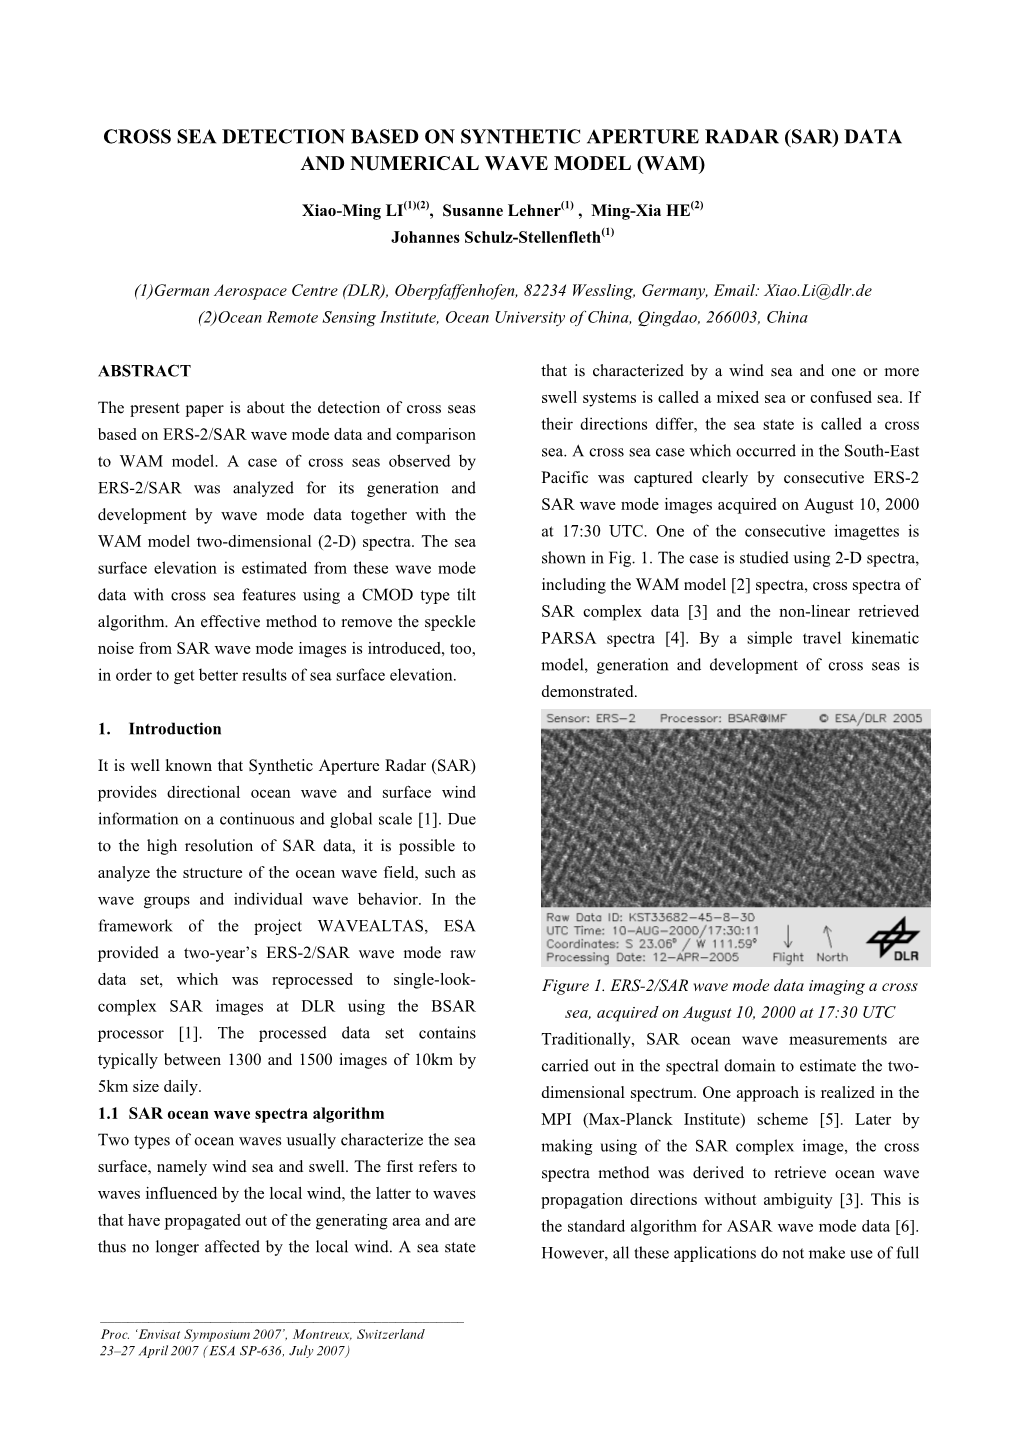 Cross Sea Detection Based on Synthetic Aperture Radar (Sar) Data and Numerical Wave Model (Wam)